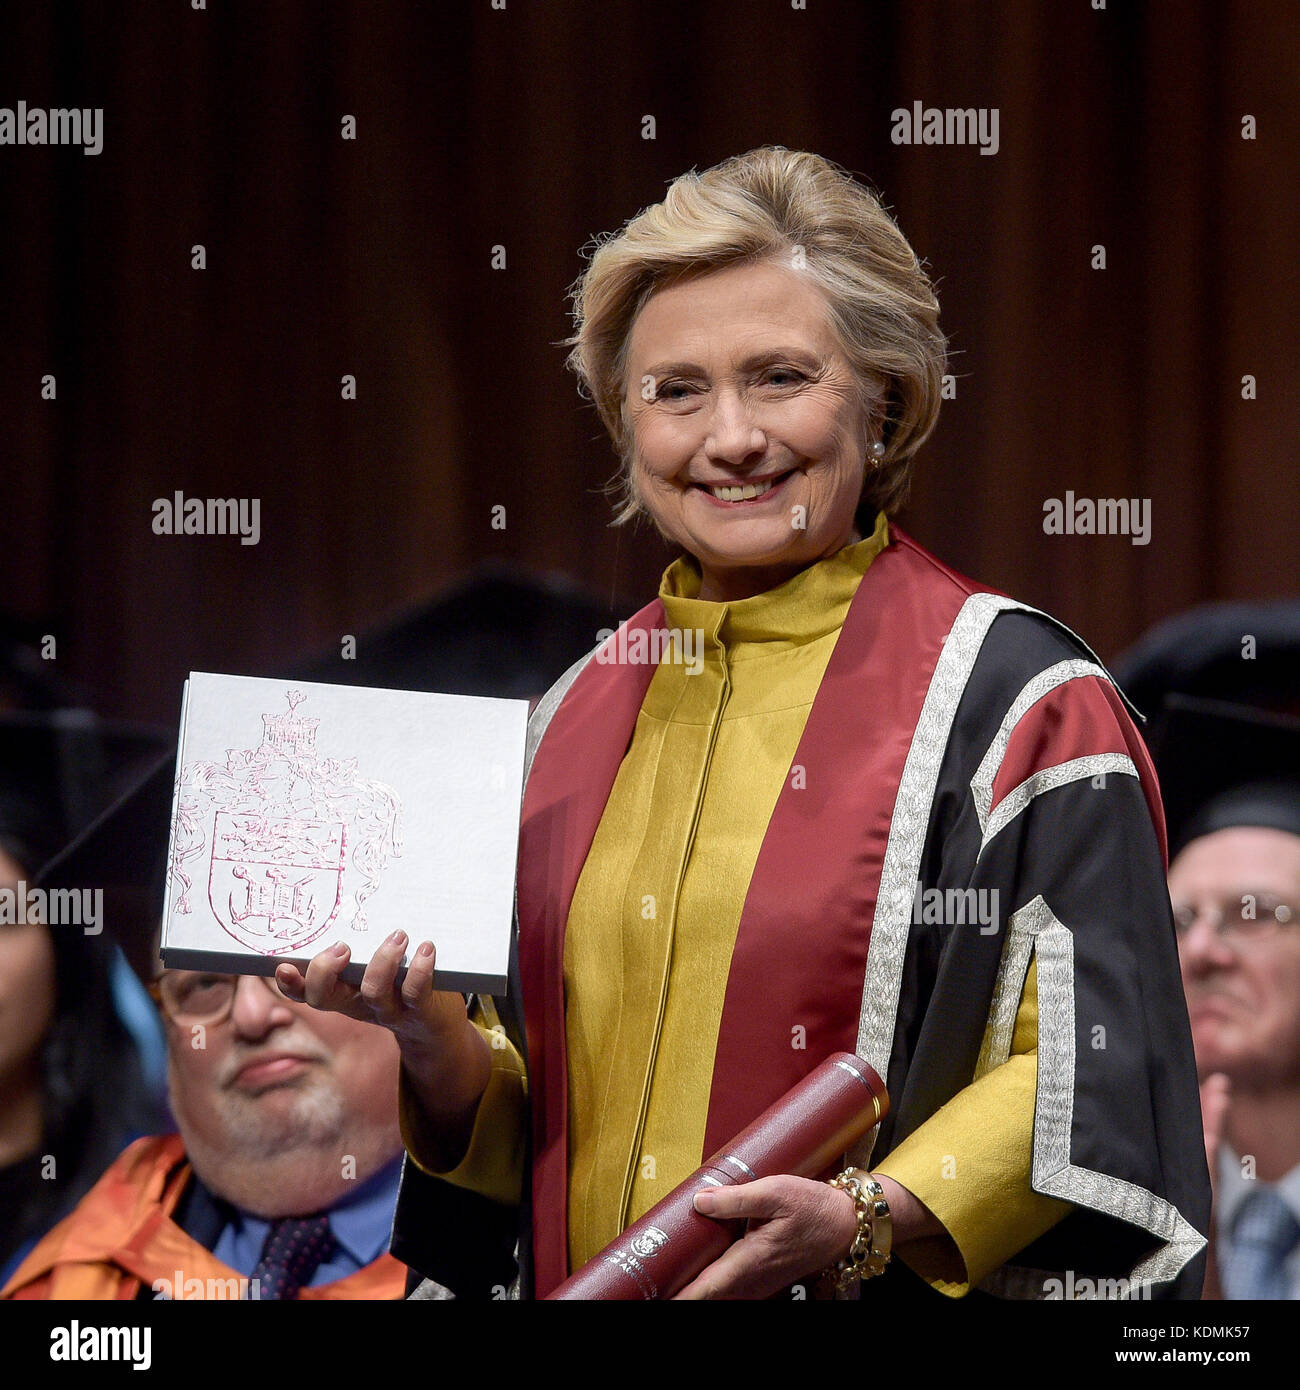 Hillary Clinton receives a Honorary Doctorate and holds up a book of her Welsh family history, at Swansea University, in recognition of her commitment to promoting the rights of families and children around the world, a commitment that is shared by Swansea University's Observatory on the Human Rights of Children and Young People. Stock Photo